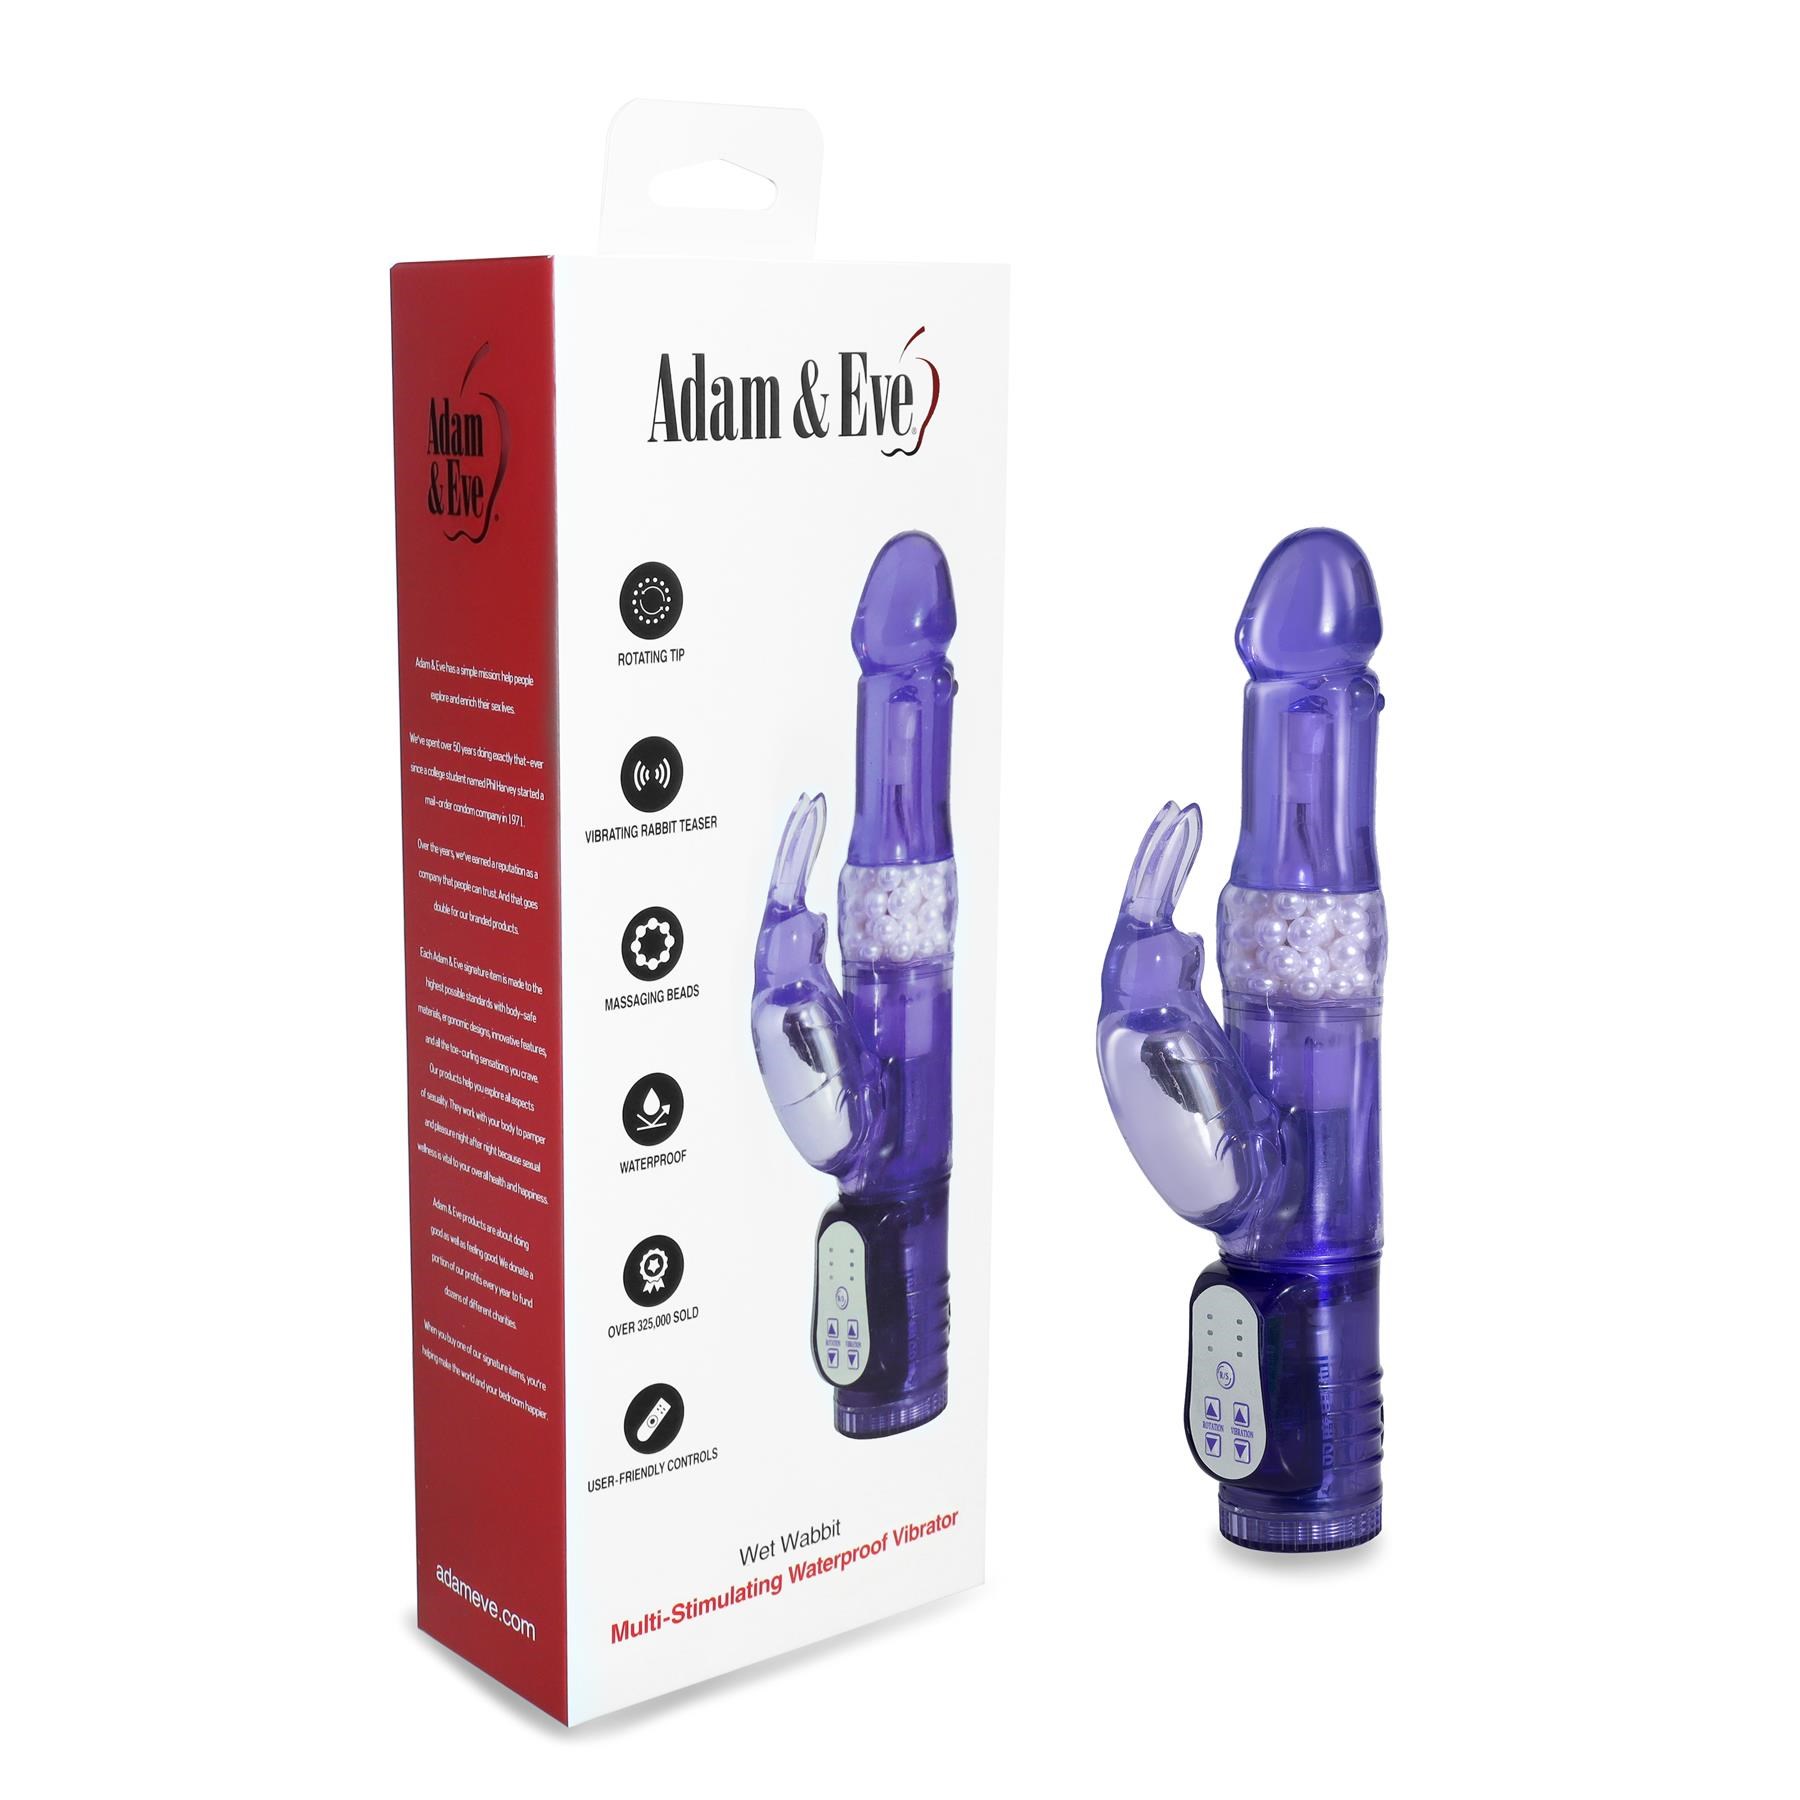 Wet Rabbit Vibrator - Product and Packaging